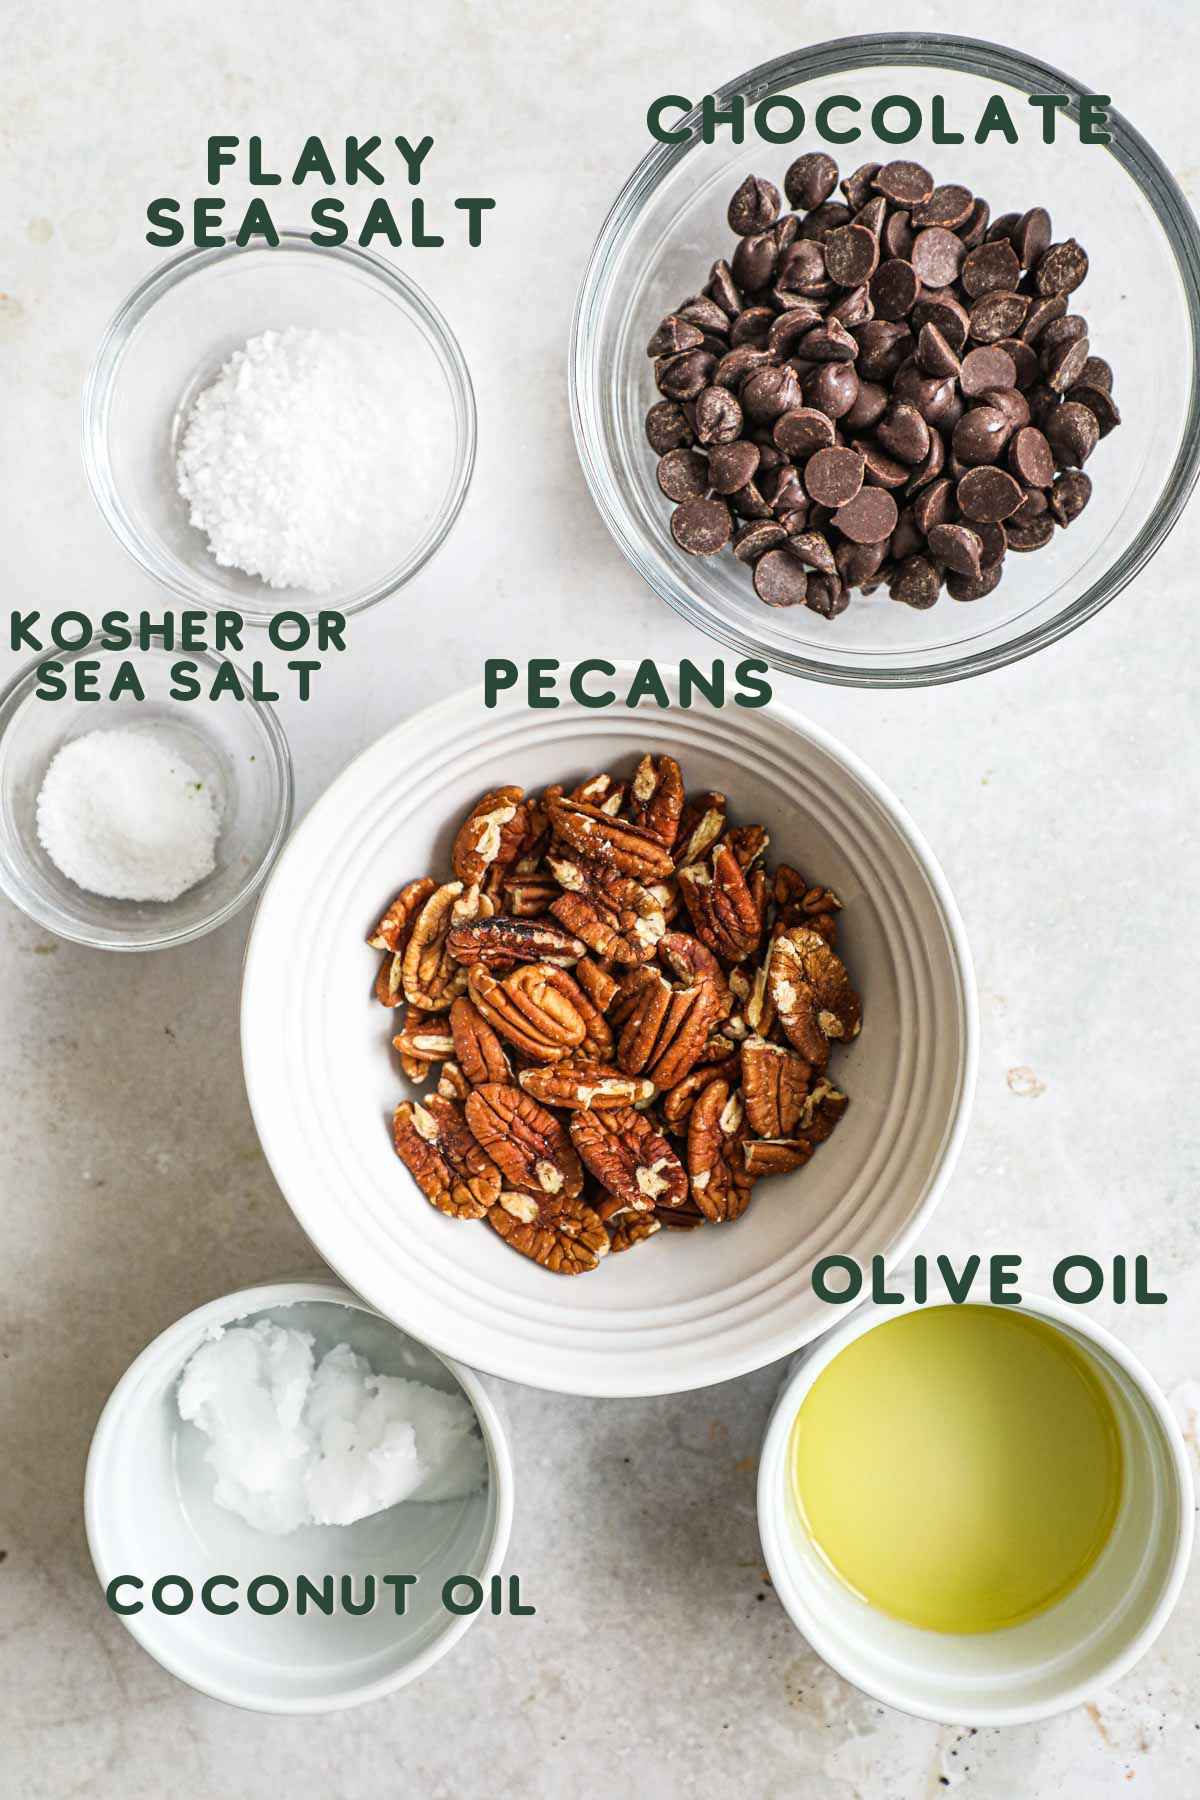 Ingredients to make homemade chocolate-covered toasted pecans, including chocolate, pecan, coconut oil, sea salt, flaky sea salt, and olive oil.